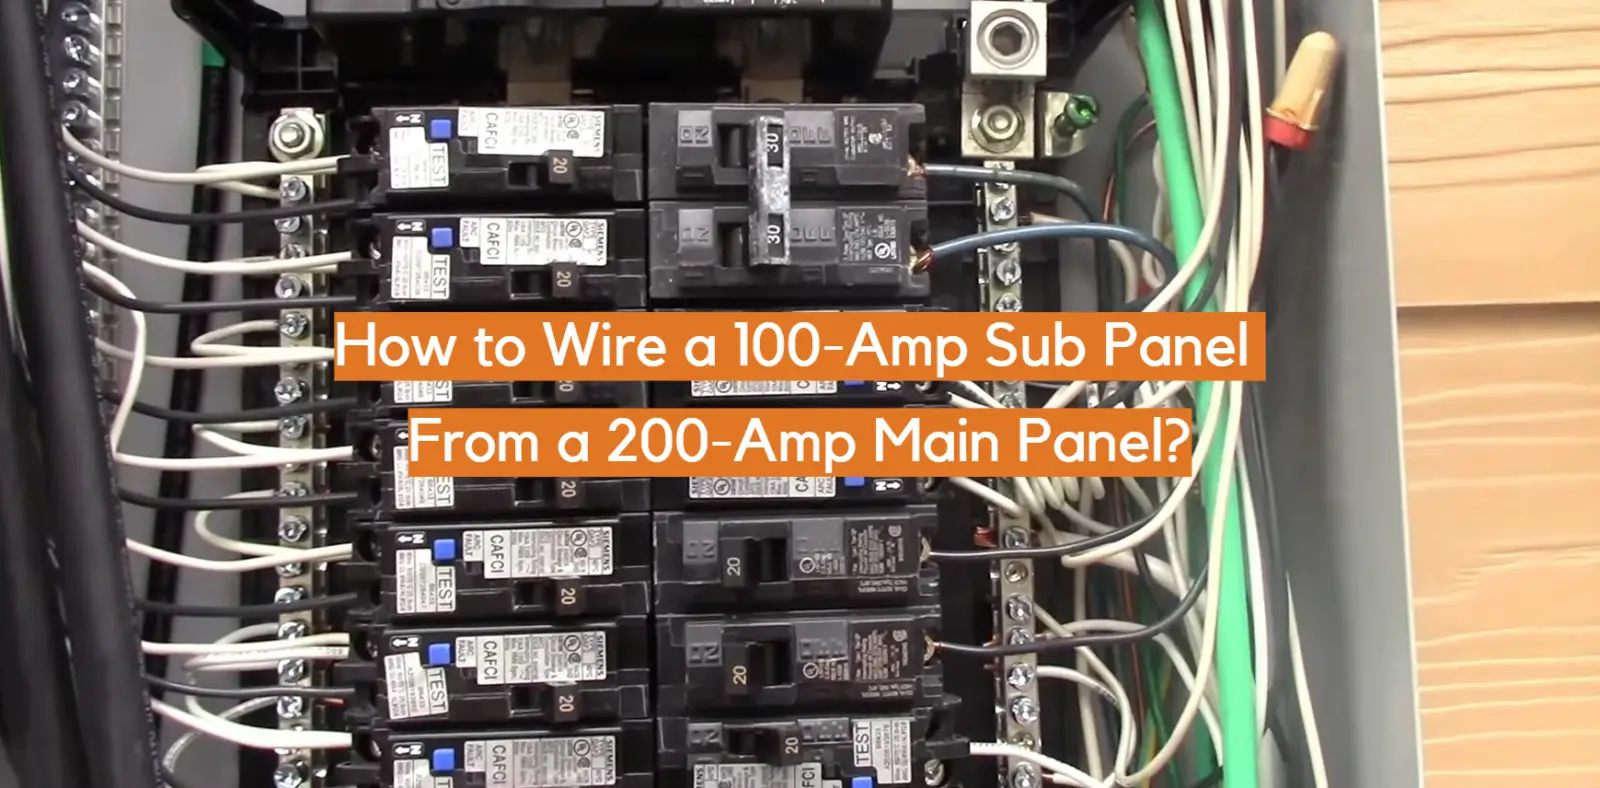 How to Wire a 100-Amp Sub Panel From a 200-Amp Main Panel?